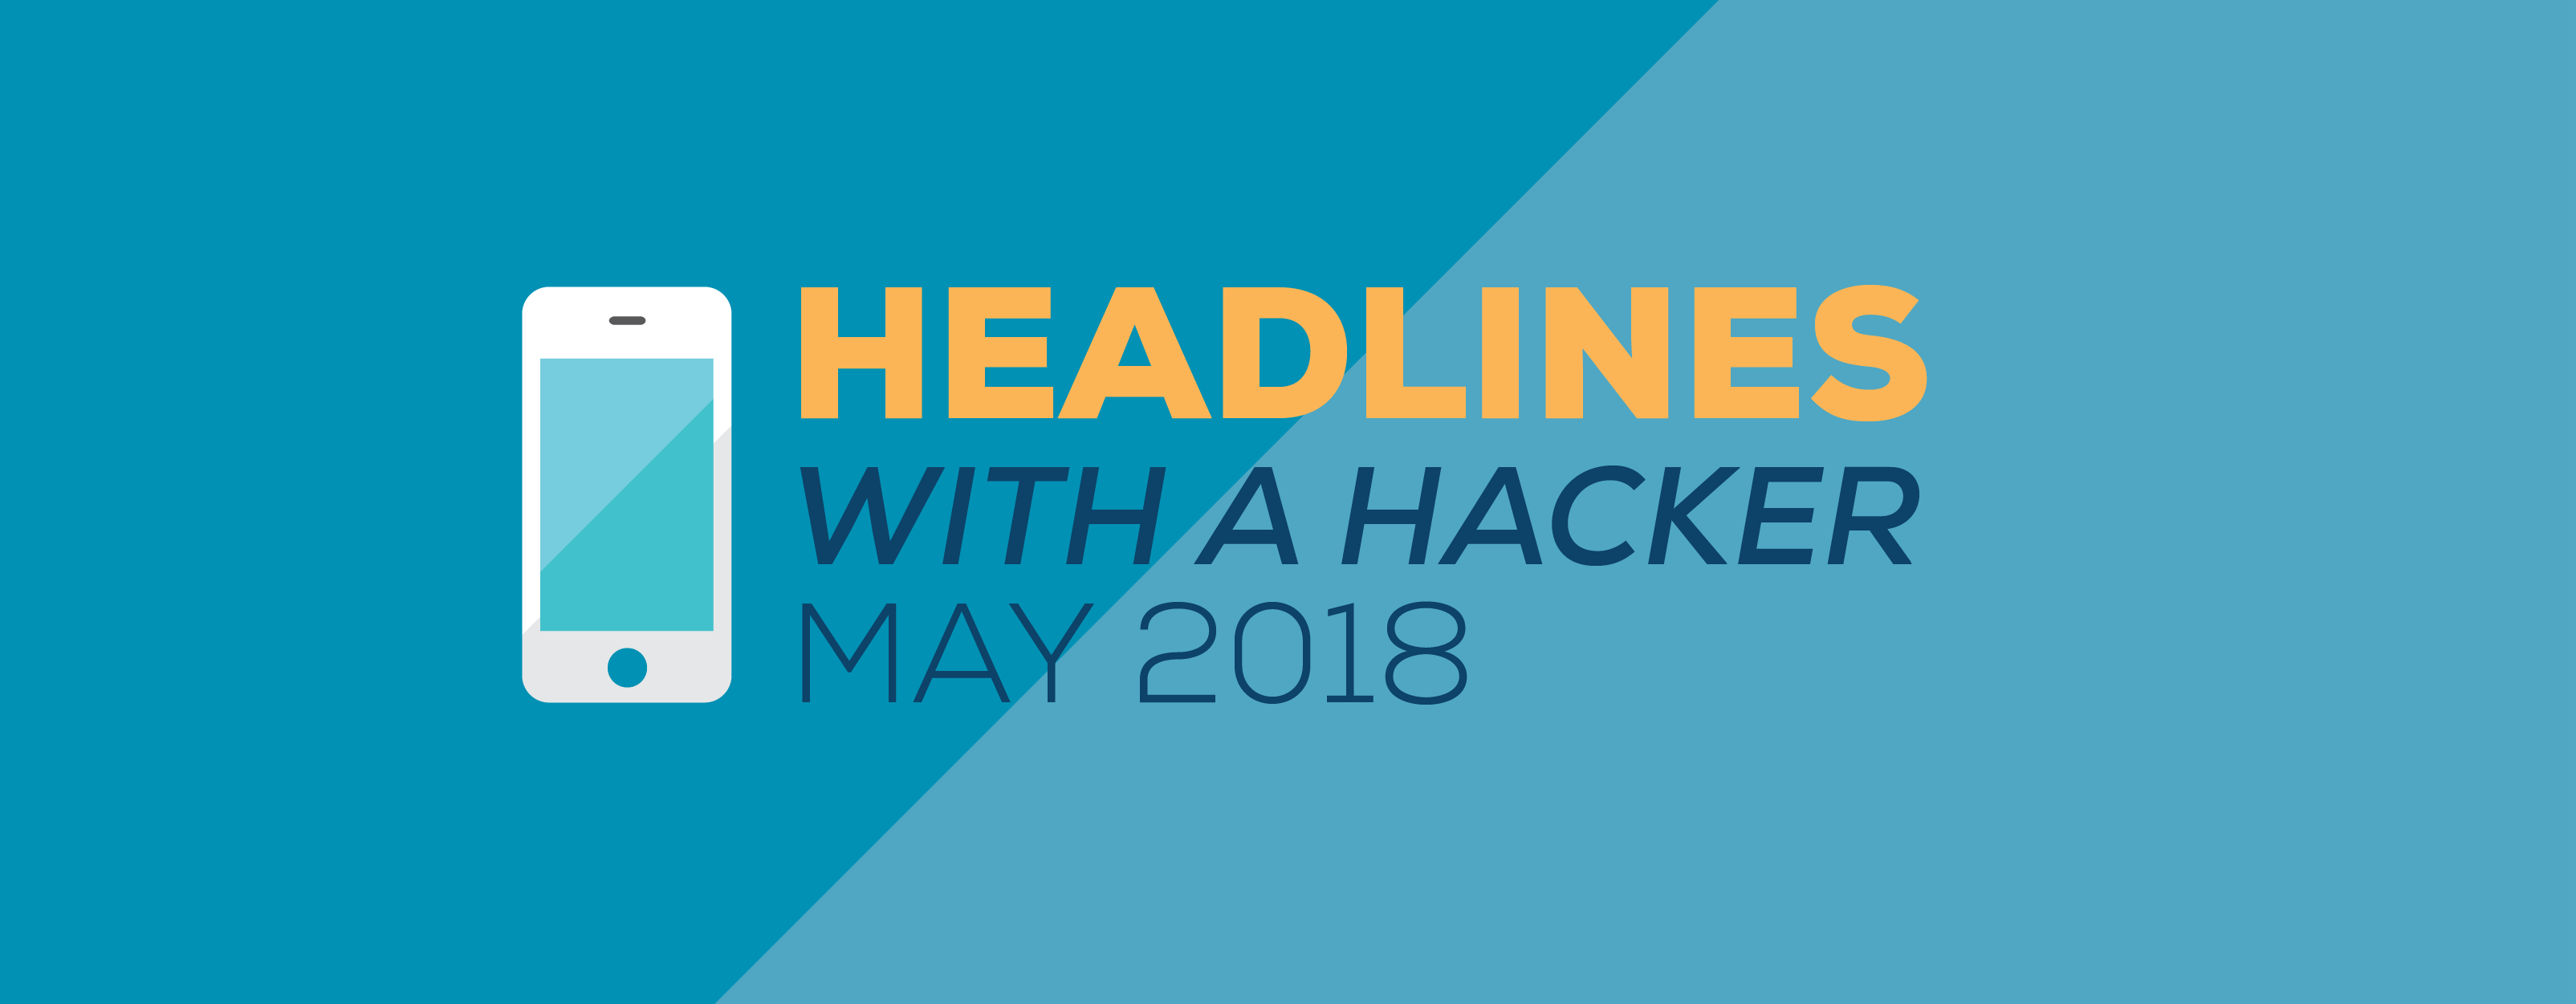 Ep.51_Headlines with a Hacker May-04